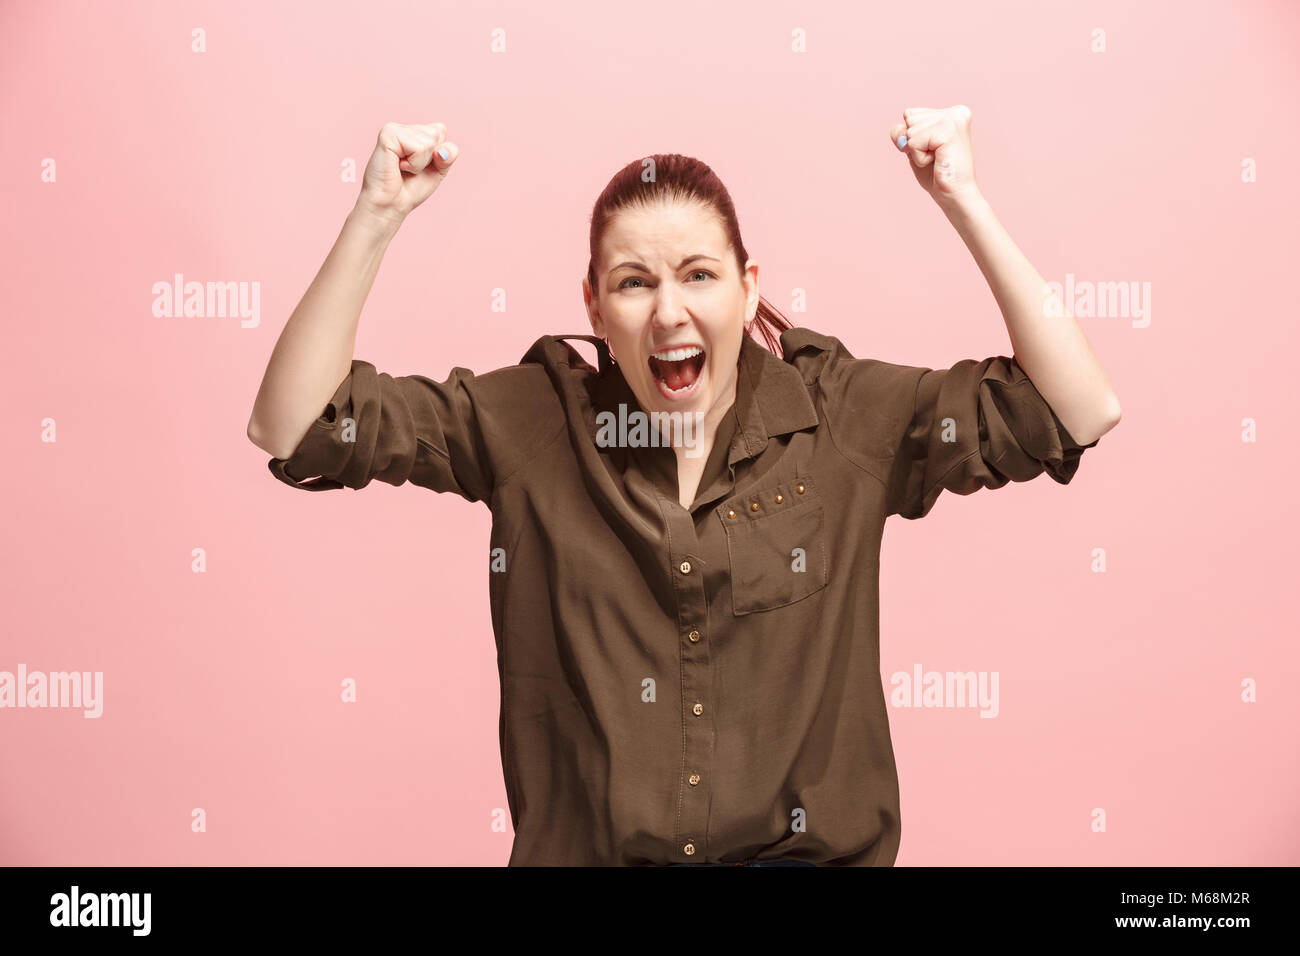 Winning success woman happy ecstatic celebrating being a winner. Dynamic energetic image of female model Stock Photo